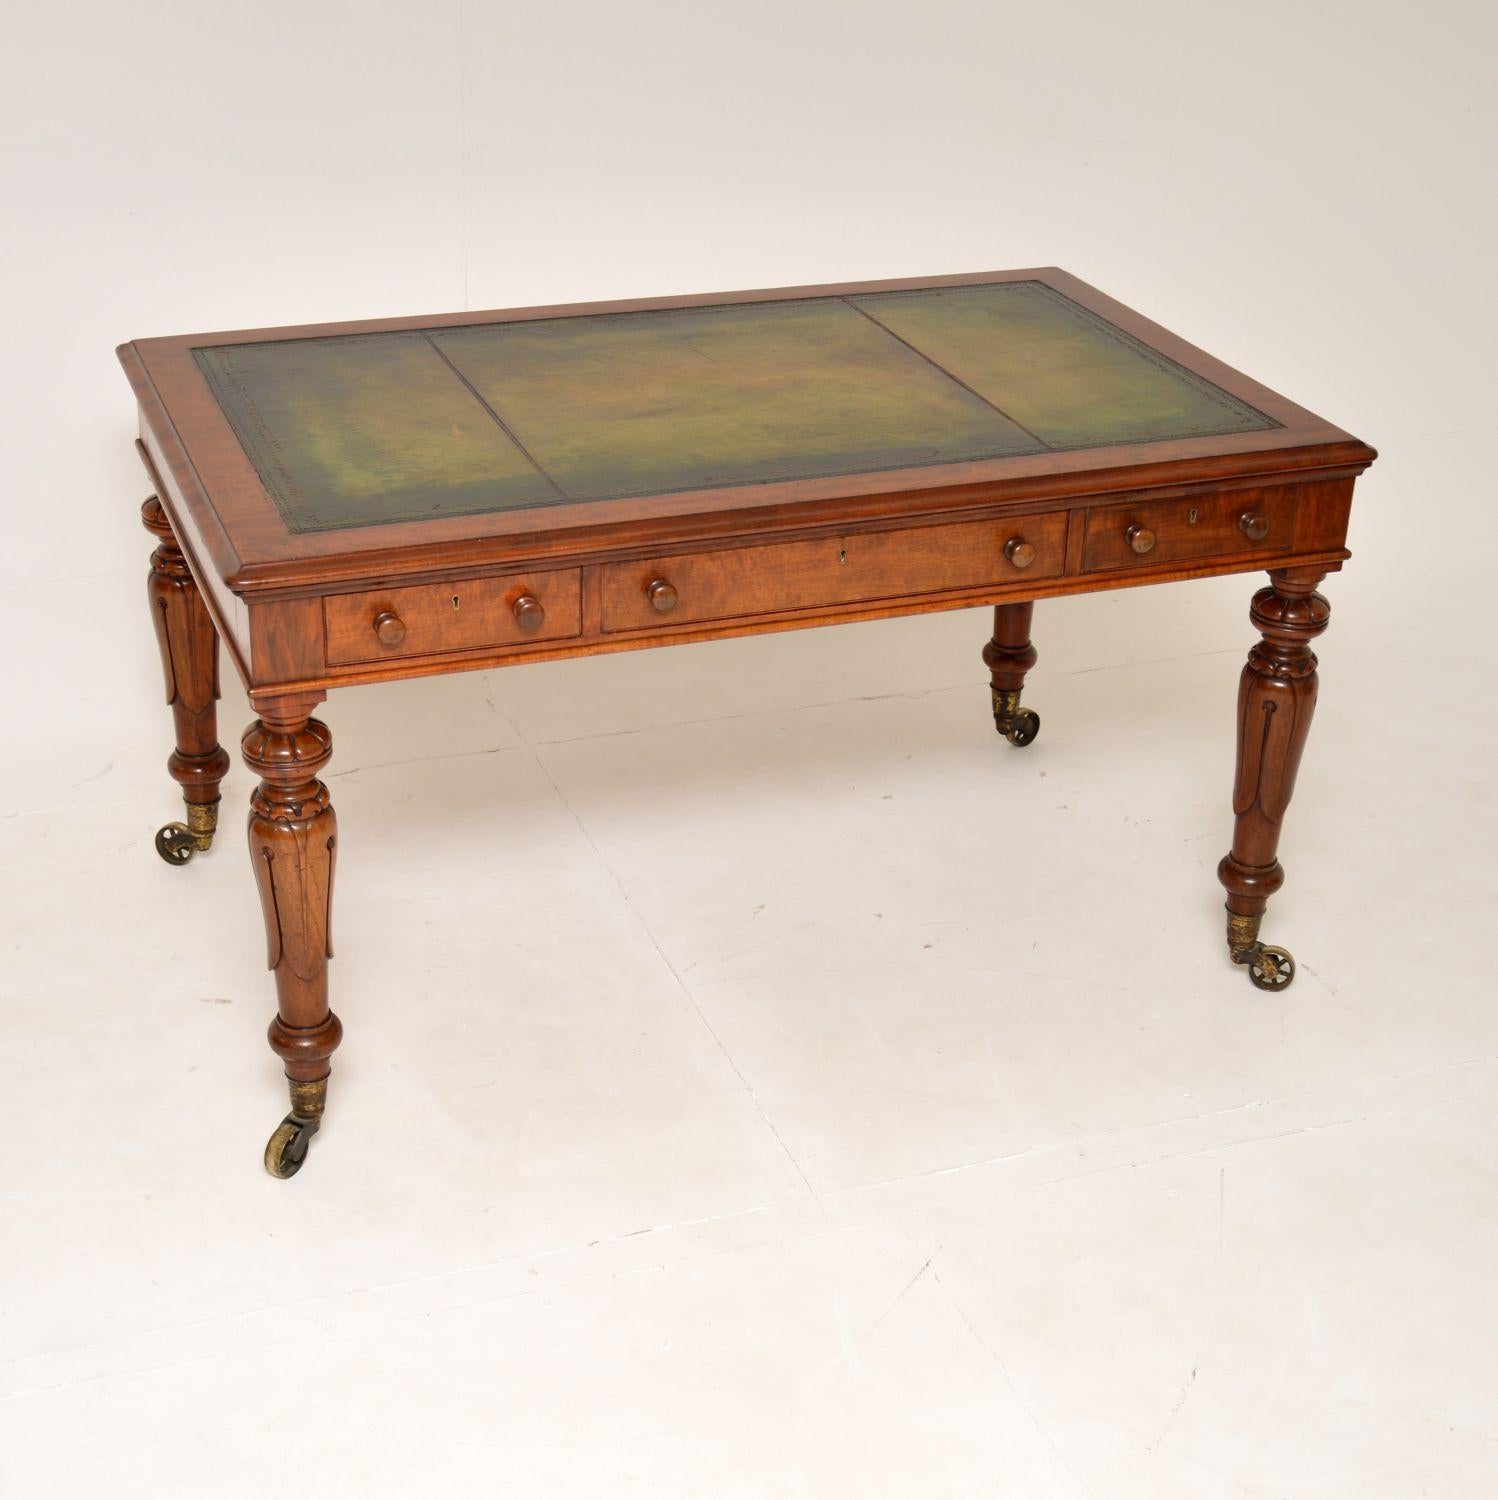 An outstanding antique writing table of the highest order. This was made in England, it dates from the William IV period of around 1830-1840.

It is of superb quality, this is one of the finest examples you could find. It is a great size and sits